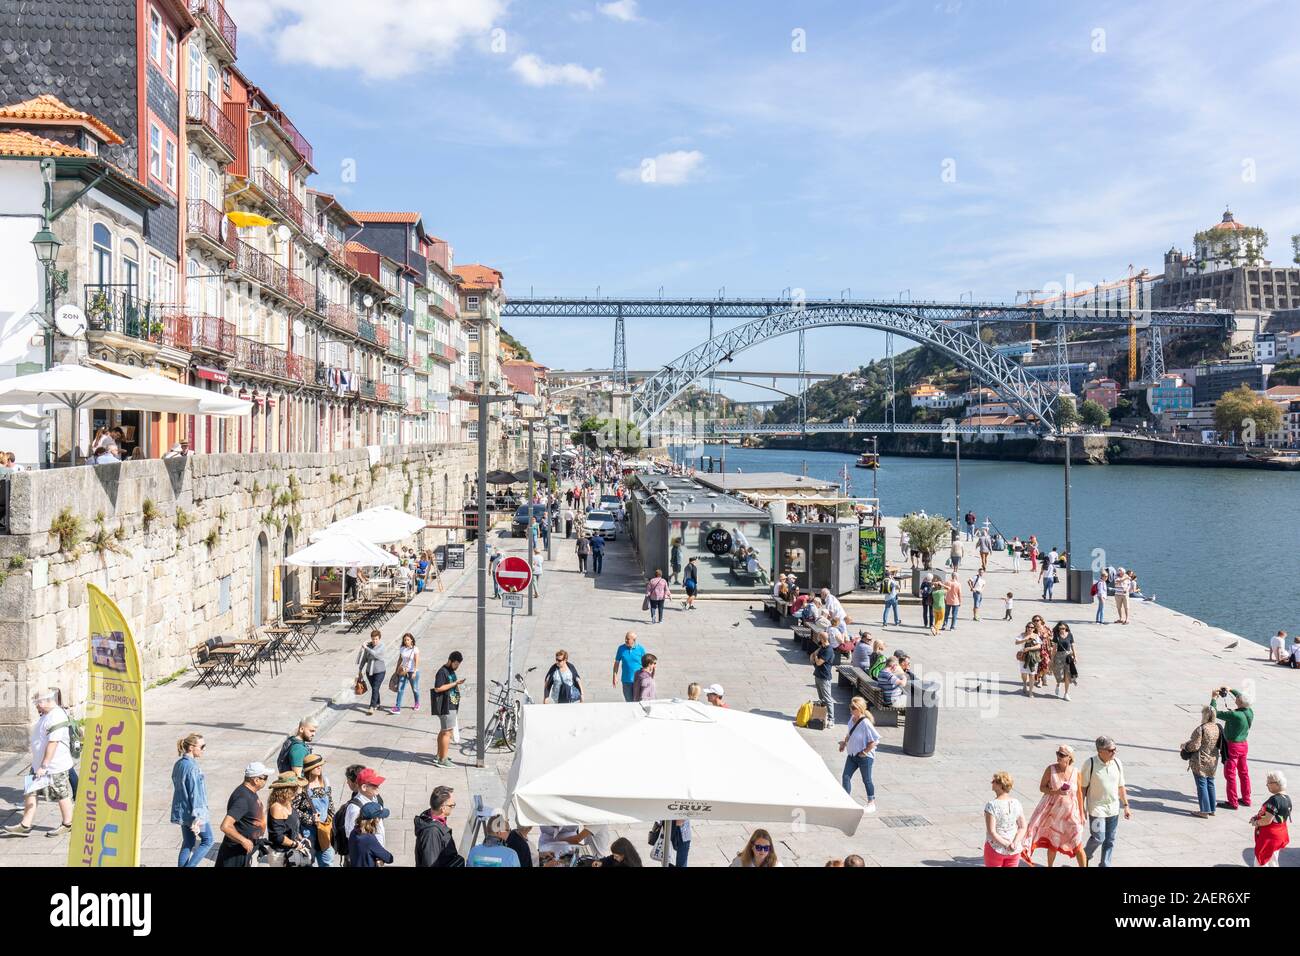 Porto, north bank of the Douro River looking eastward towards the Luis I bridge.  Tourists queue to take boat rides along the Douro river Stock Photo